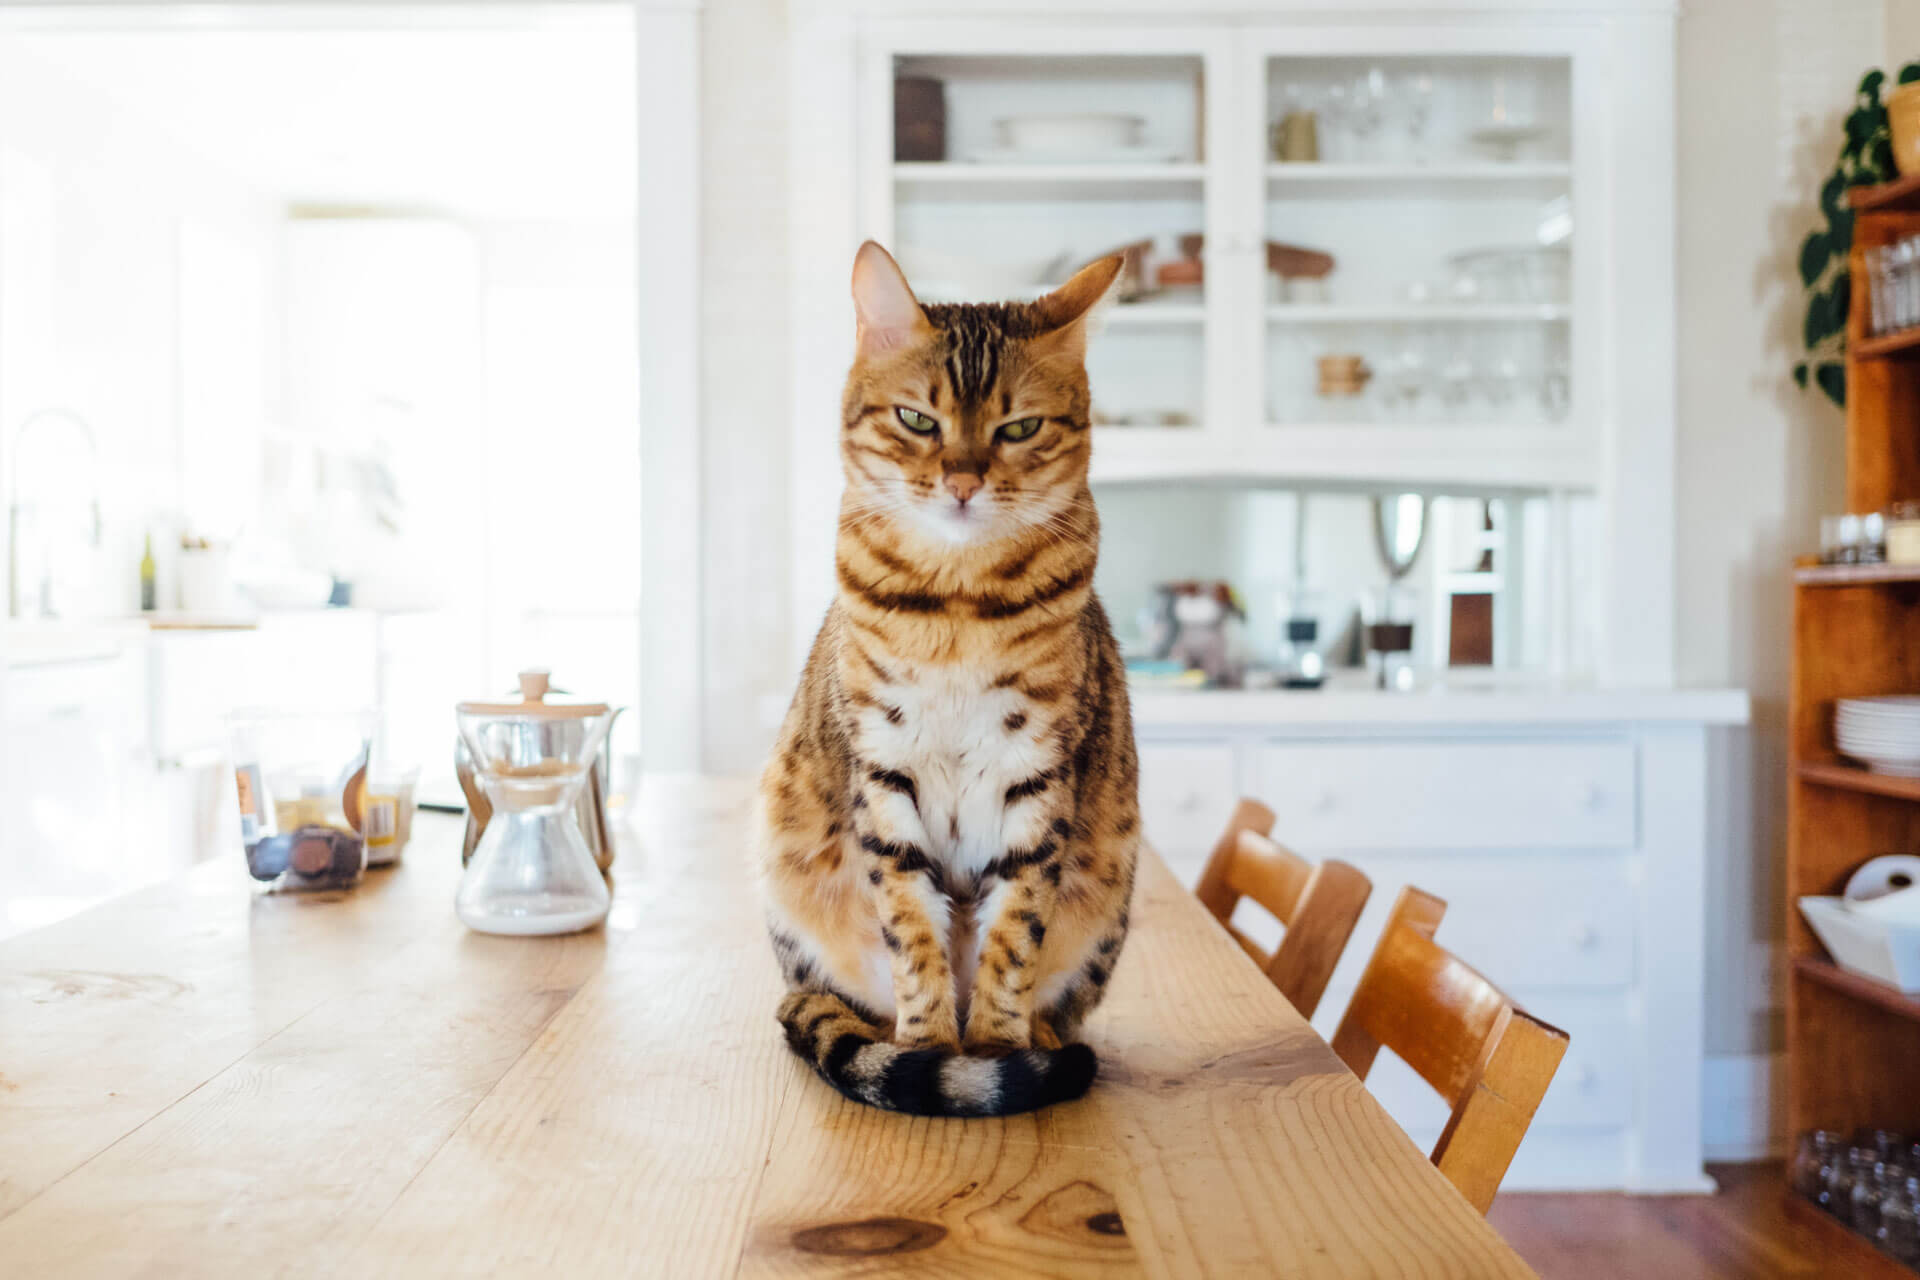 BEHAVIOR PROBLEMS IN CATS AND HOW TO TREATMENT THEM